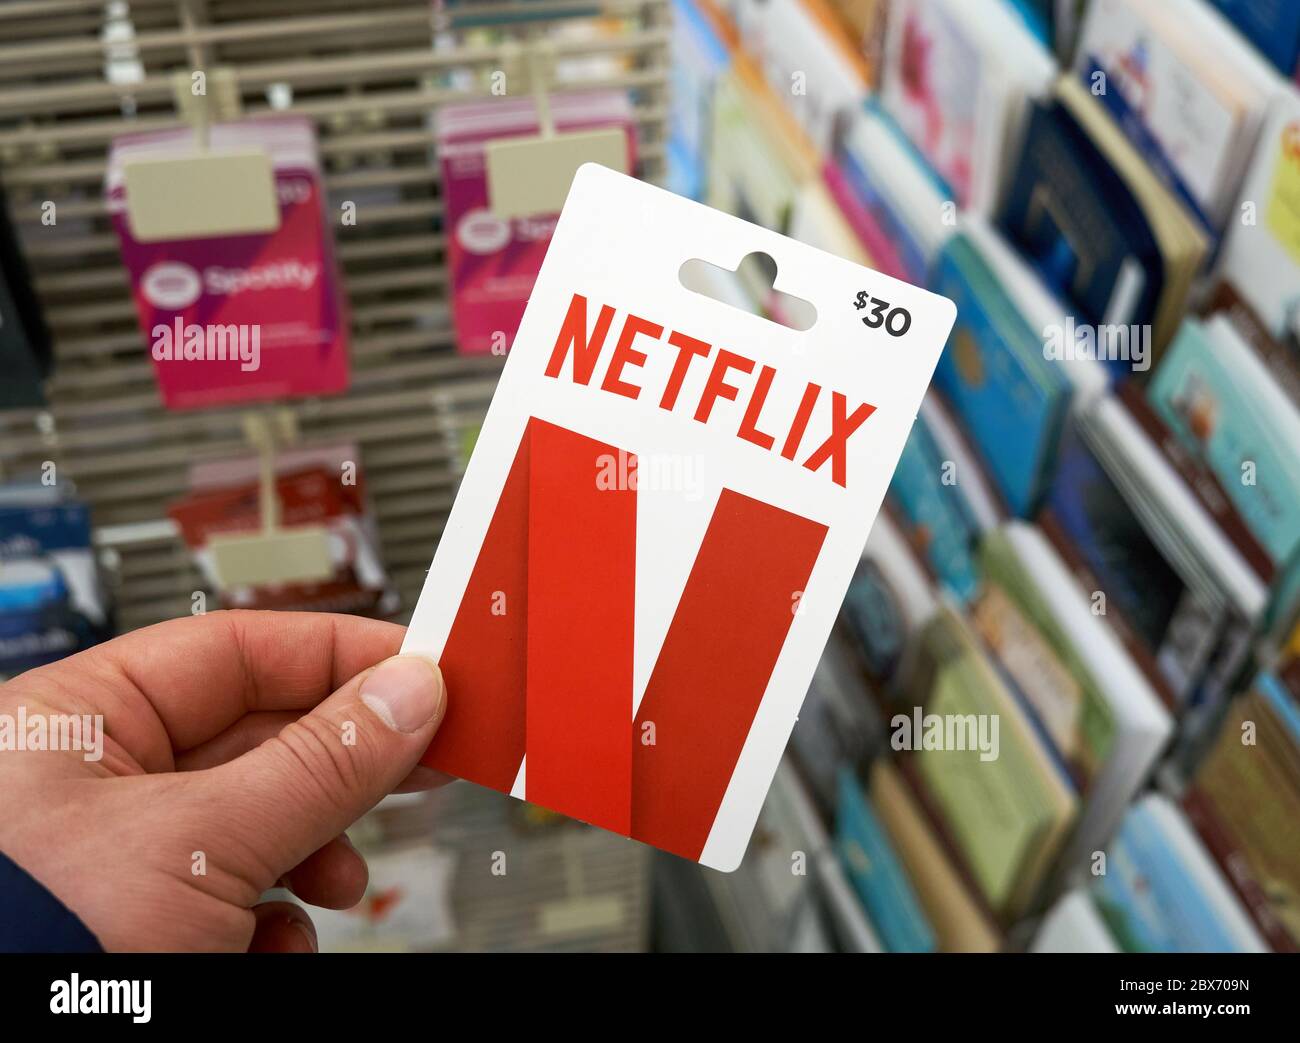 Montreal, Canada - May 03, 2020: Netflix gift card in a hand over a stand with gift cards. Netflix is a streaming service that allows to watch TV show Stock Photo